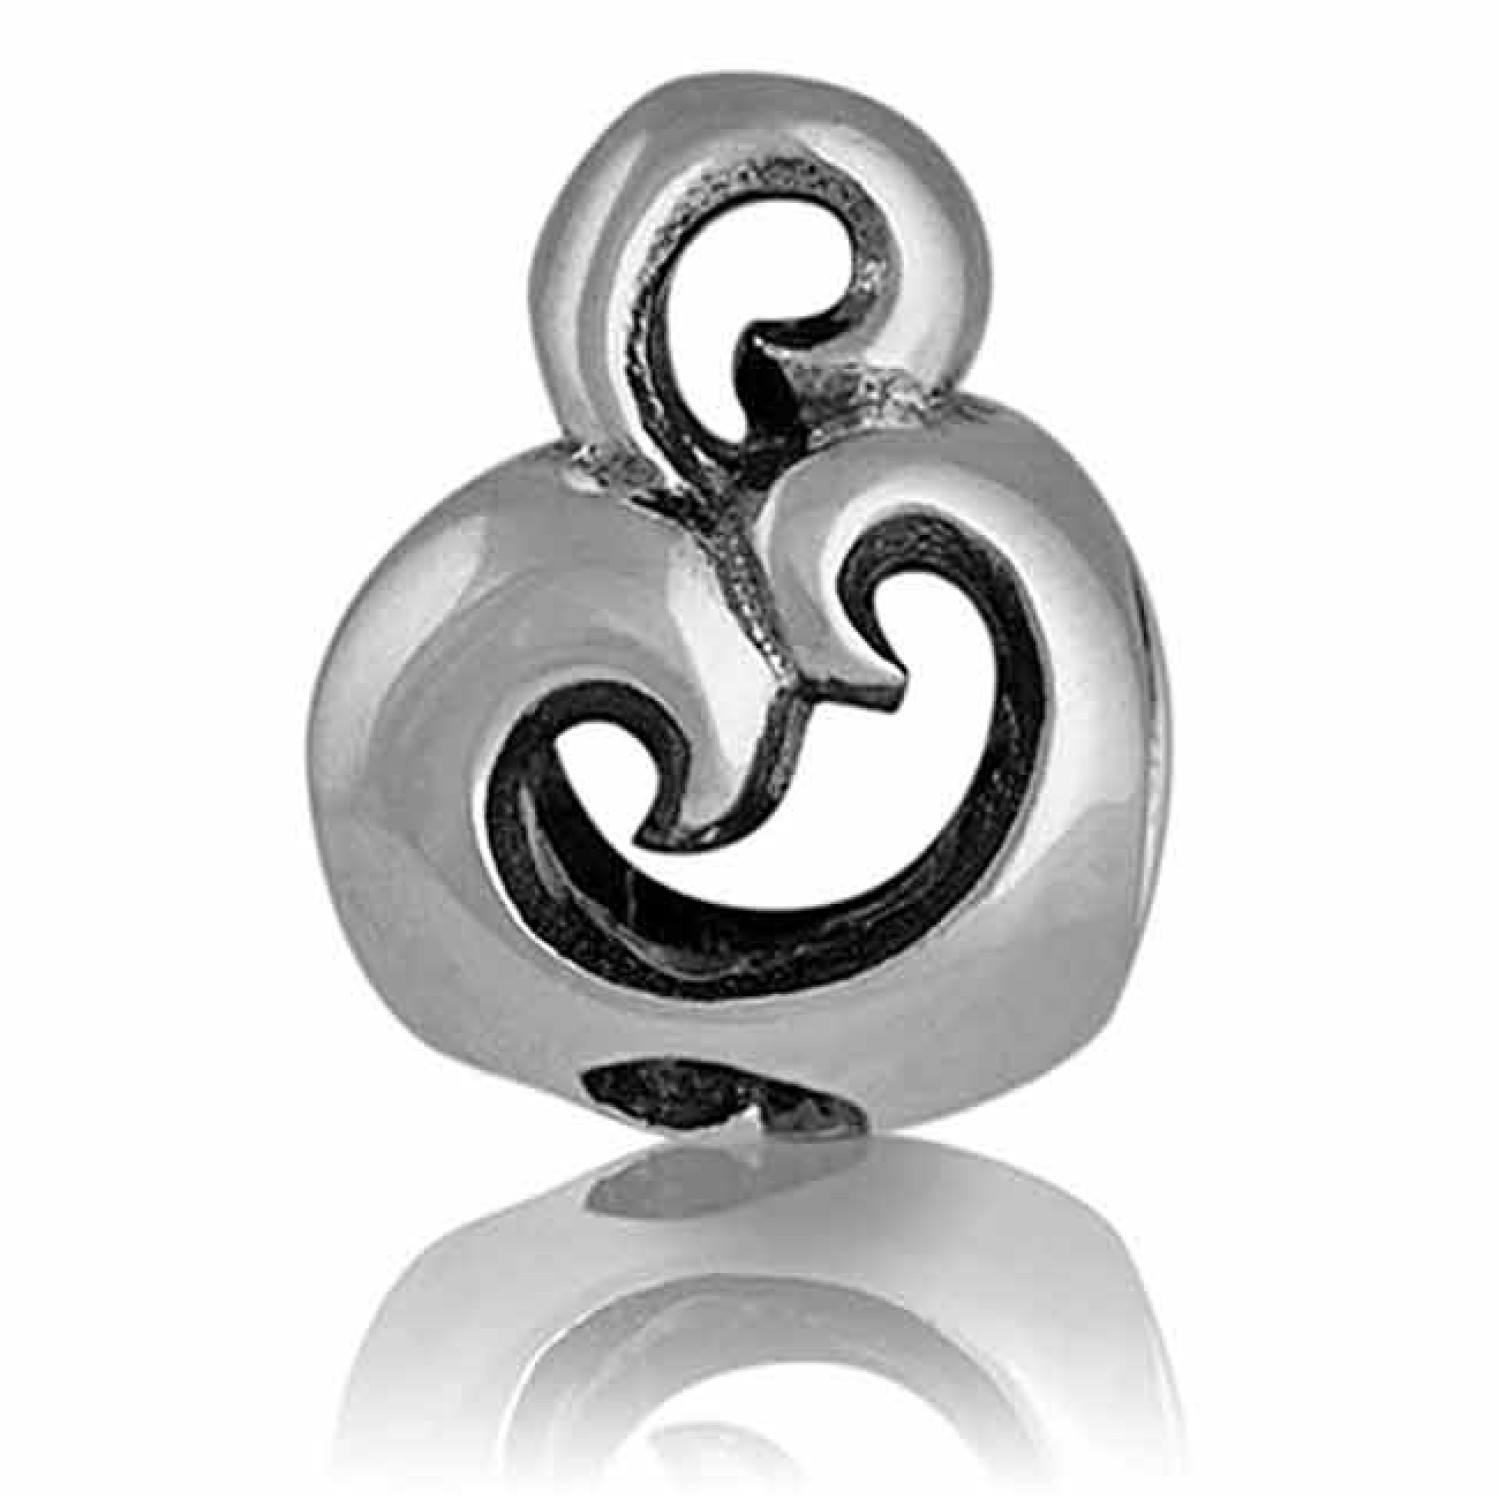 LK005 NZ Manaia - Guardian. LK005 NZ Manaia - Guardian The Manaia is a spiritual guardian, a wise provider and protector who looks over us. This charm provides direction and protection to those who wear it, surrounding our loved ones with an invisi @chris